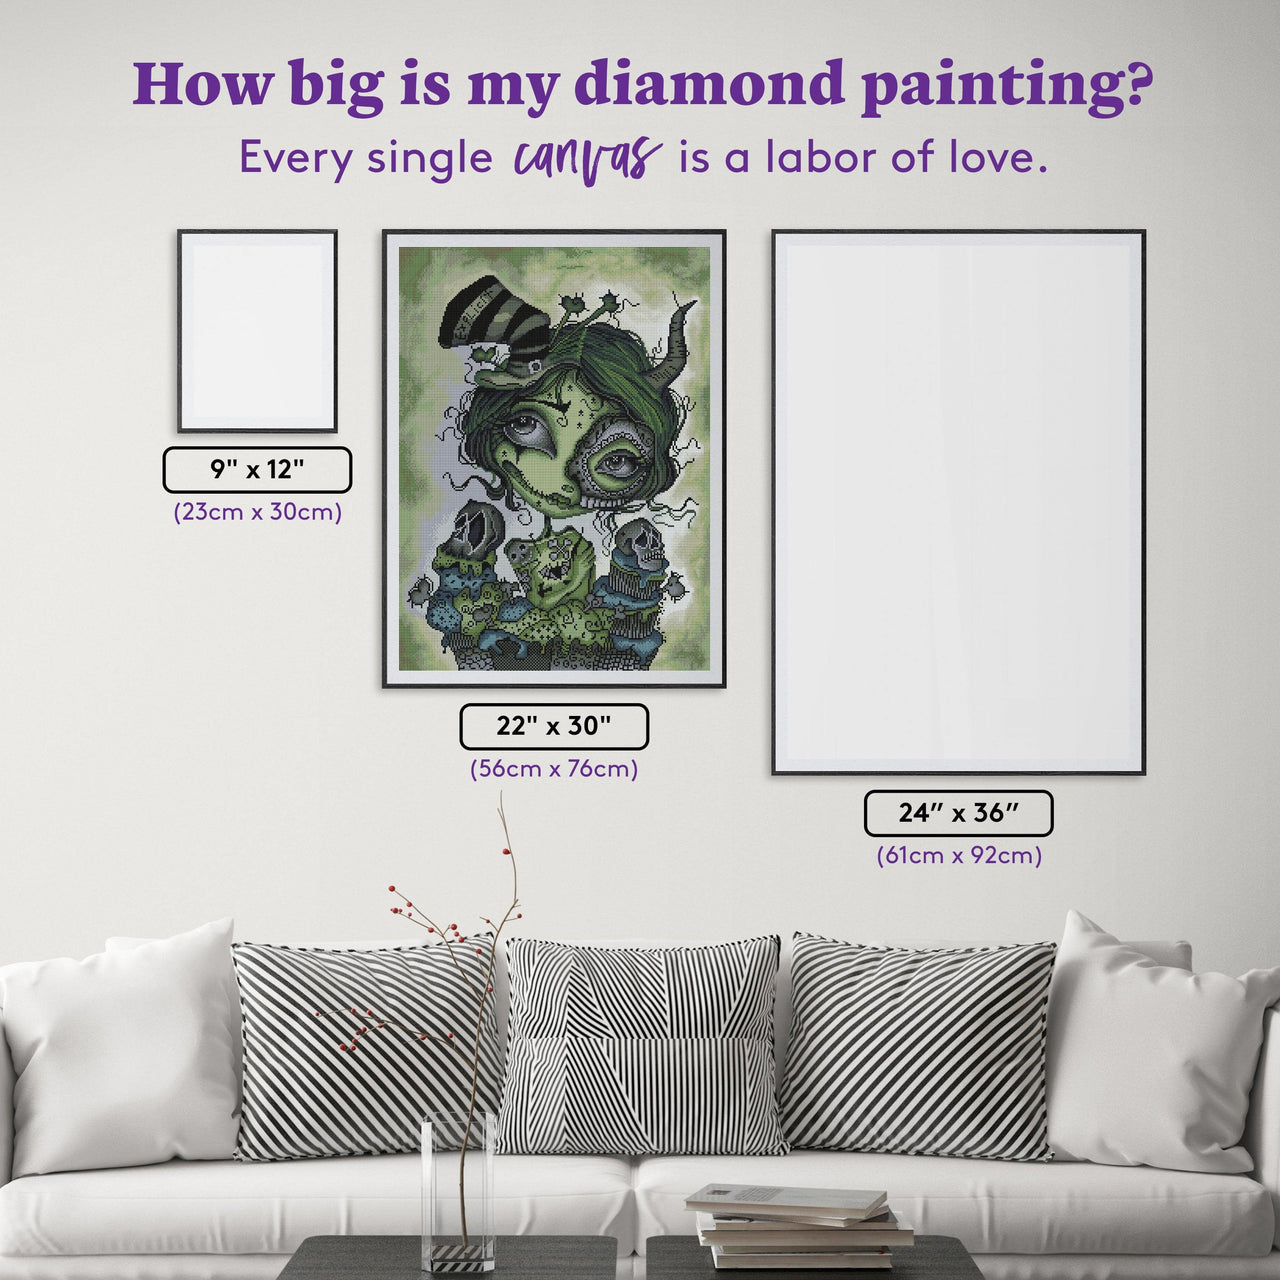 Diamond Painting Explicit Zombie Girl 22" x 30" (56cm x 76cm) / Round with 30 Colors including 2 ABs / 53,929